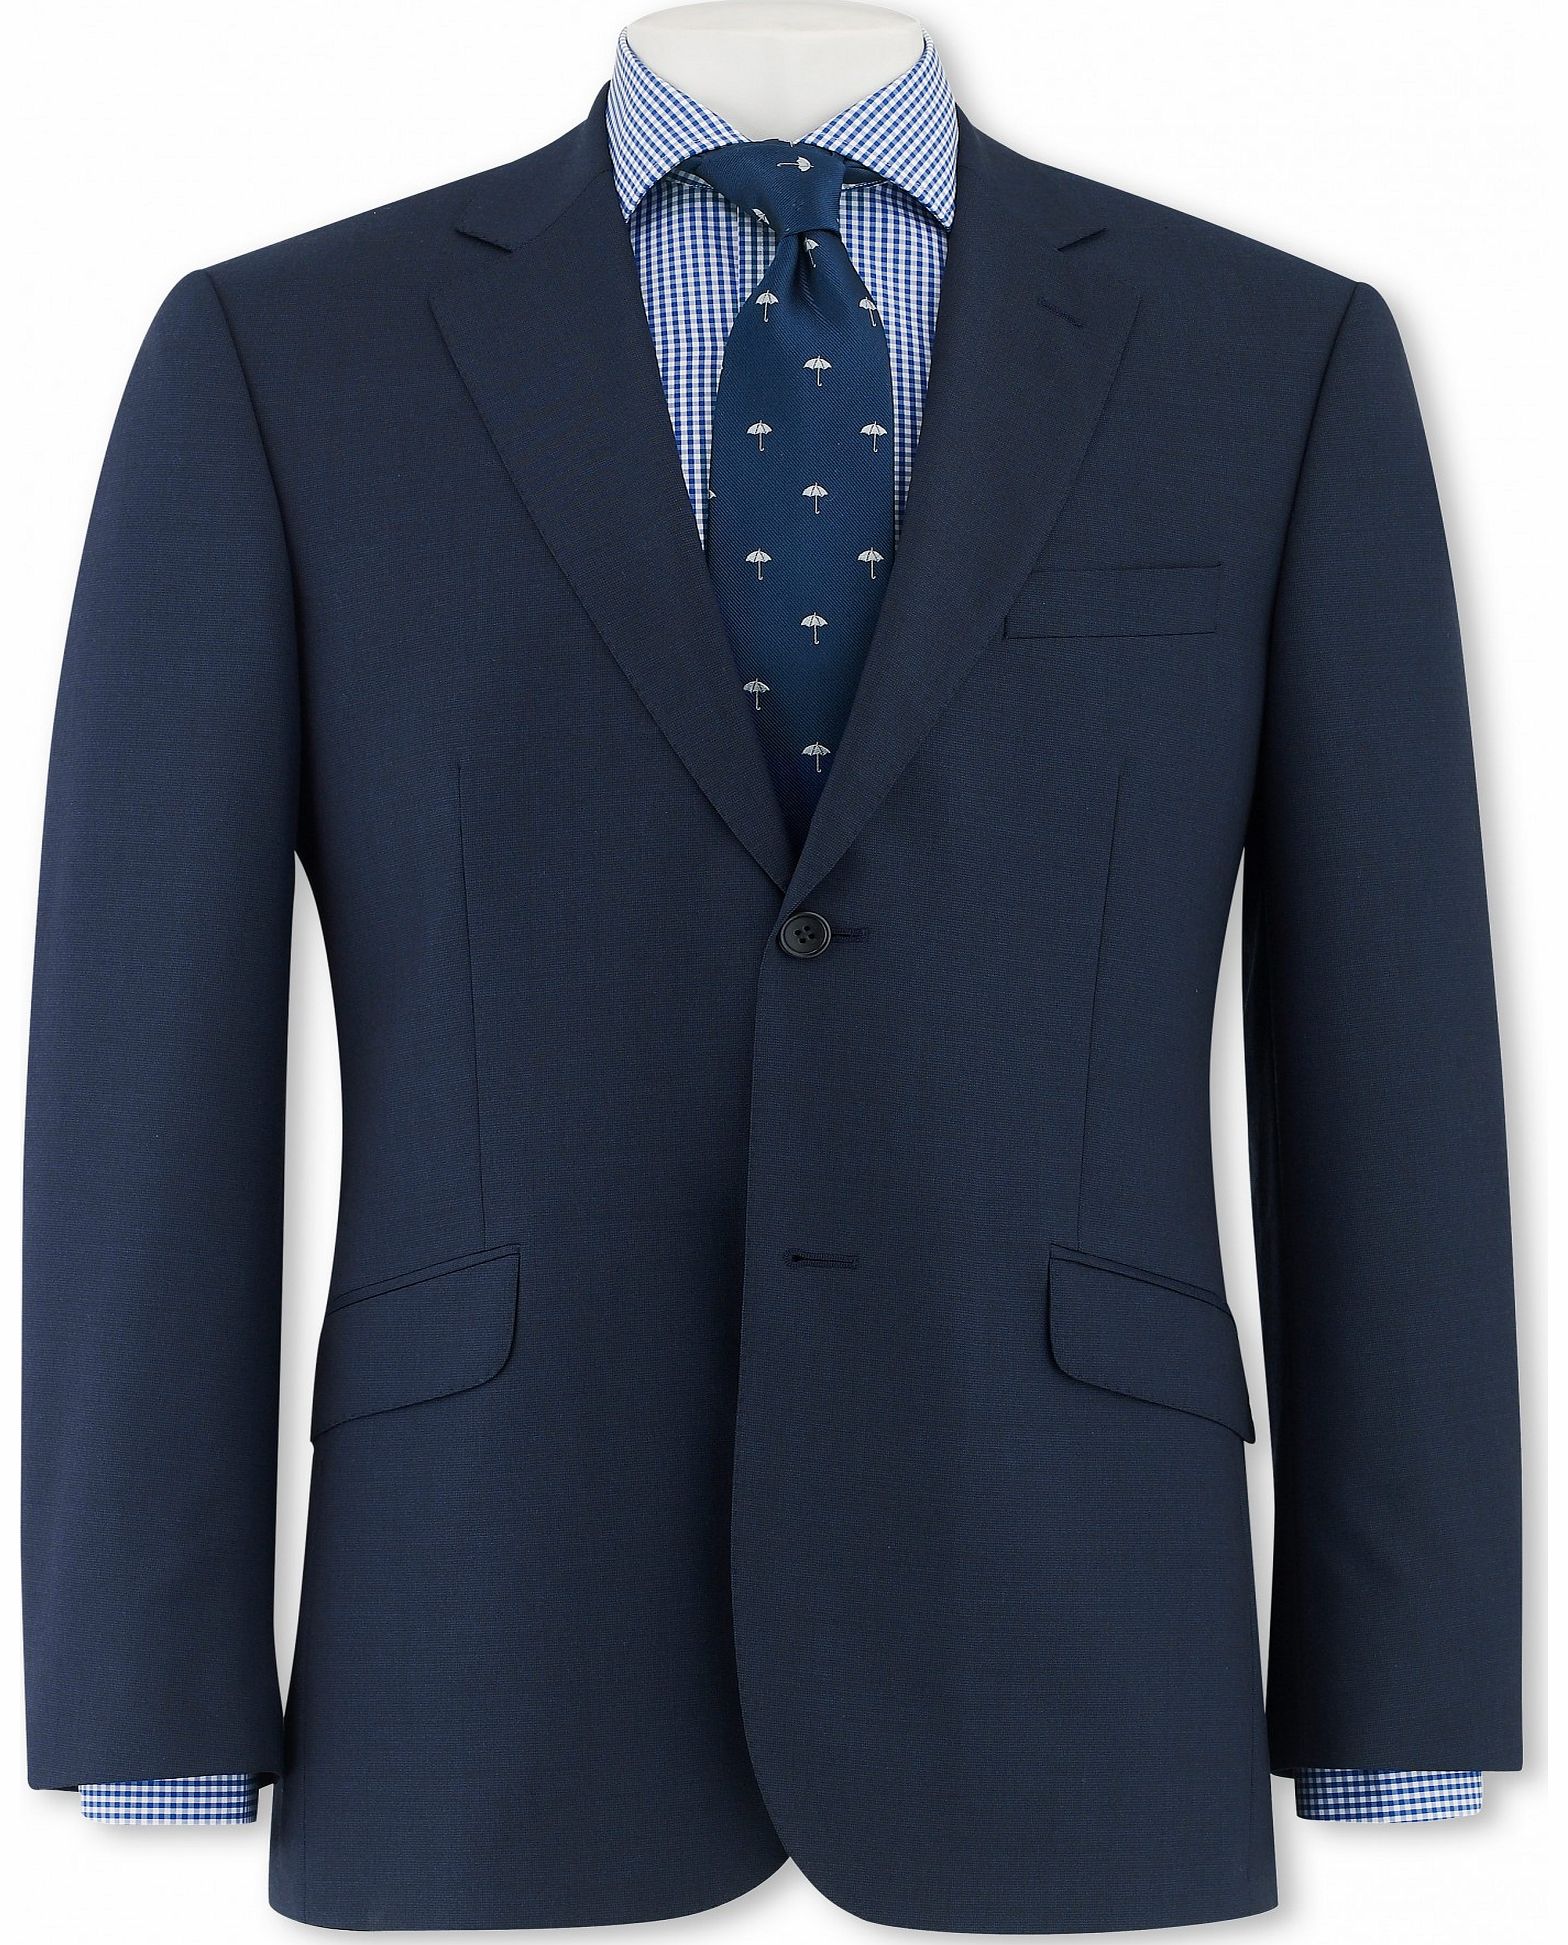 Navy Microdot Suit Jacket 50`` Long